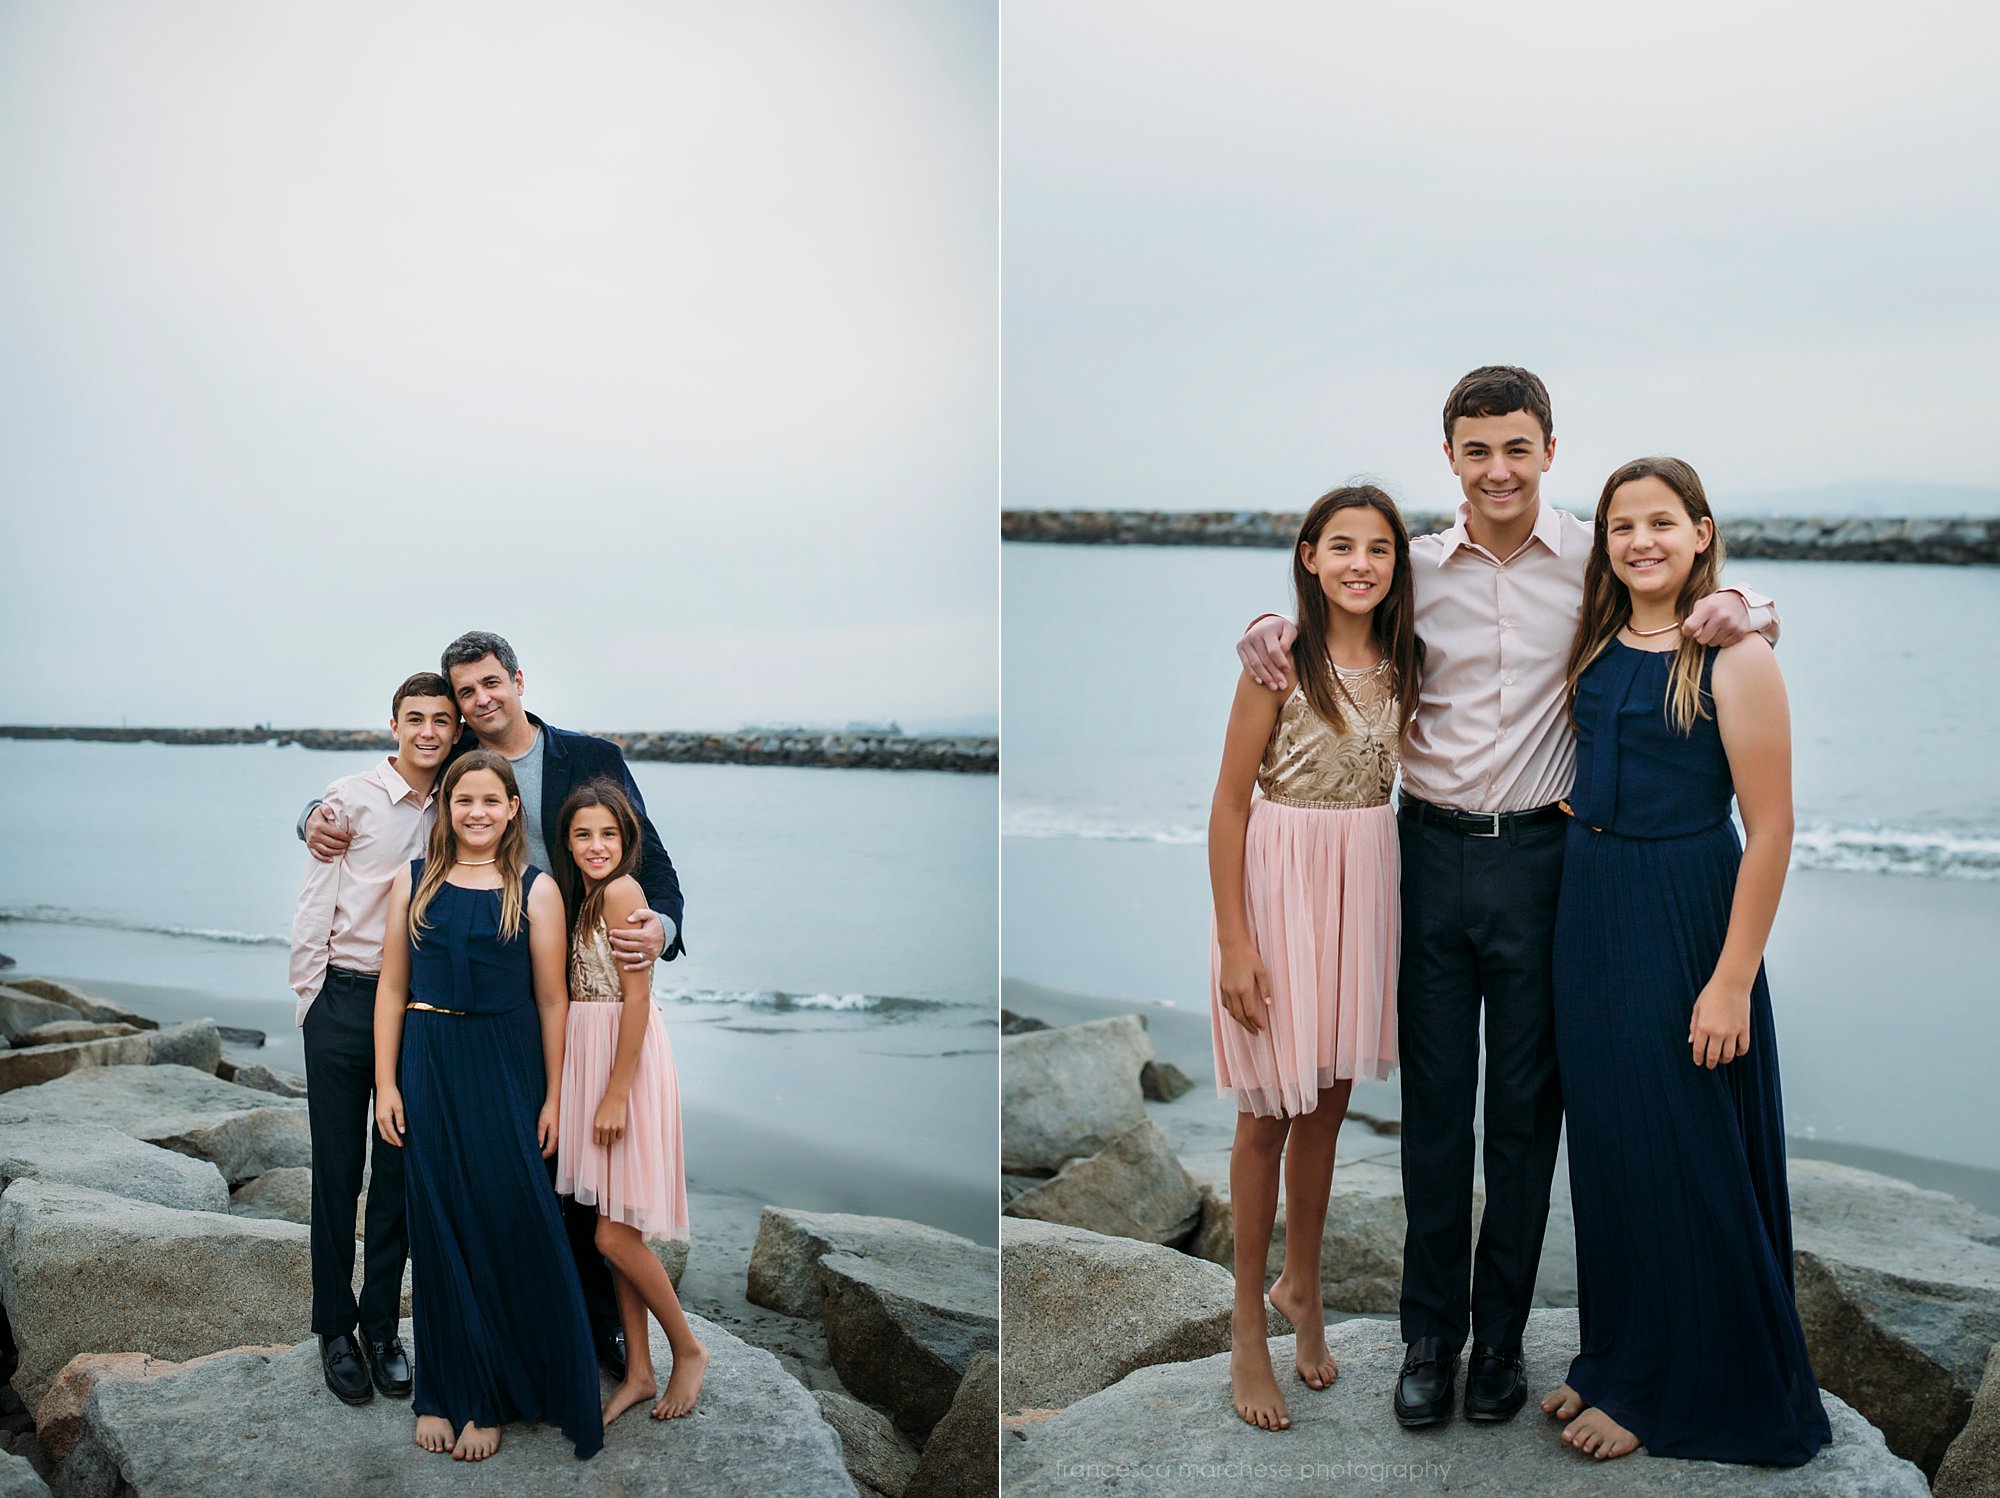 Francesca Marchese Photography - Family Photographer Starkman Family sunset beach session - dad with older children